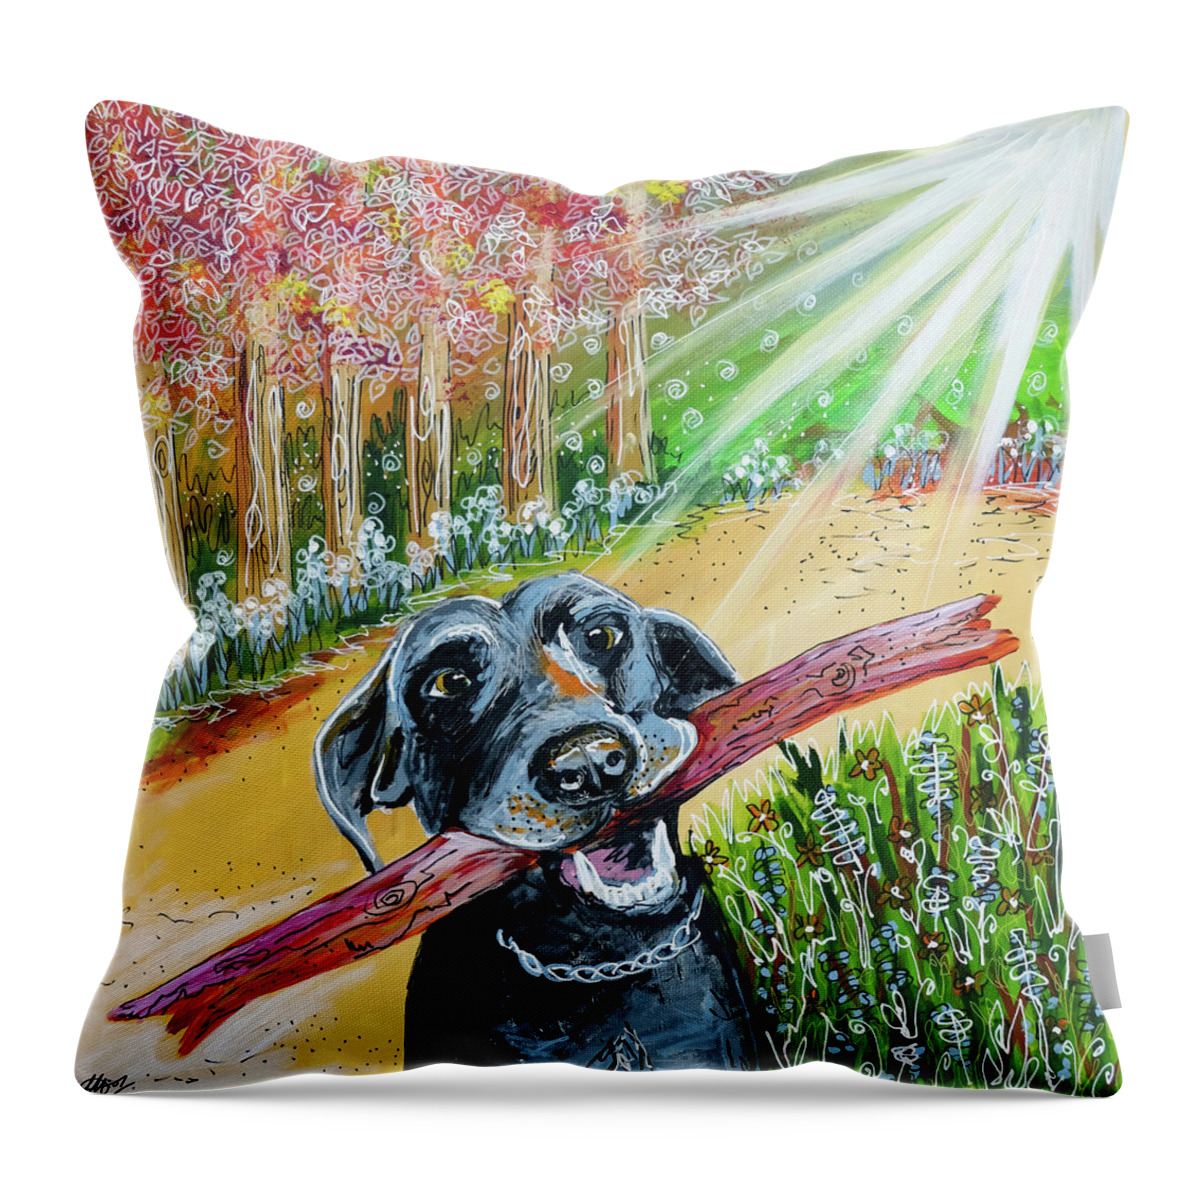 Monty The Dog Throw Pillow featuring the painting Monty the Dog by Laura Hol